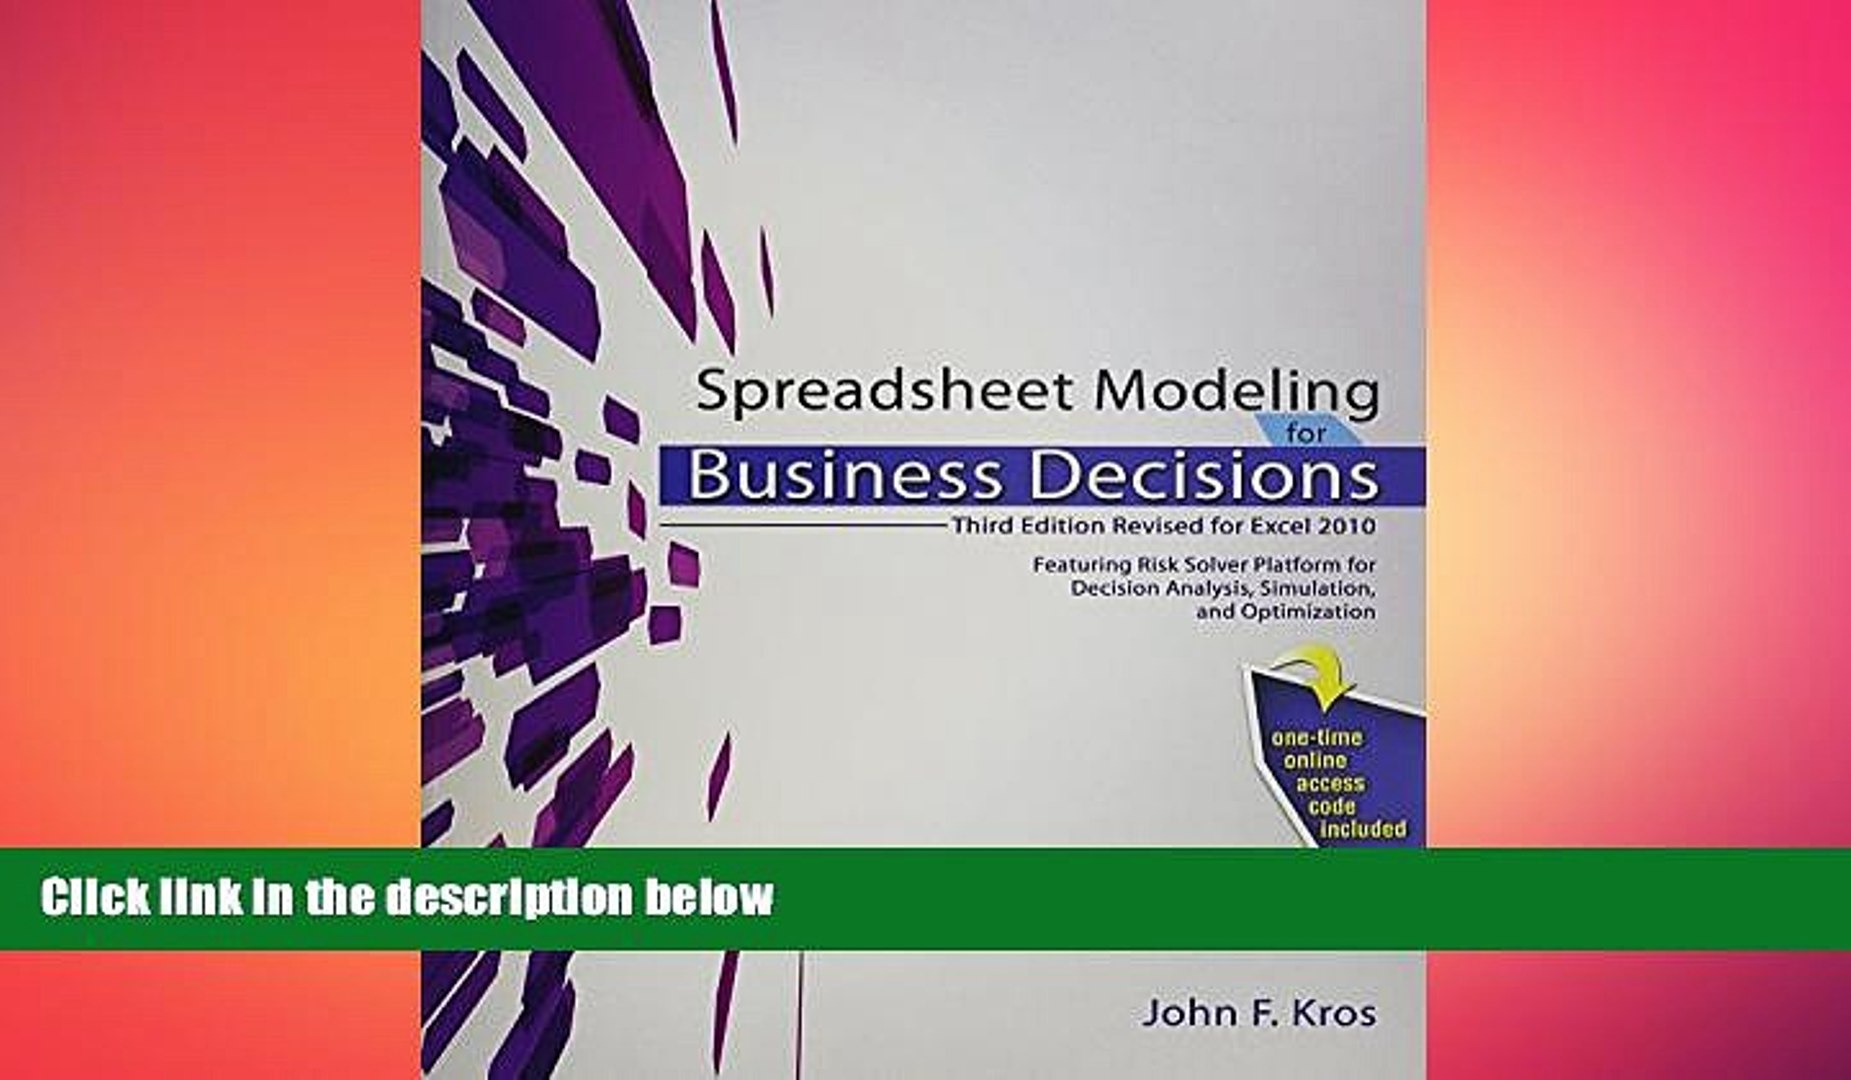 Spreadsheet Modeling For Business Decisions 3Rd Edition with Free Download Spreadsheet Modeling For Business Decisions Book